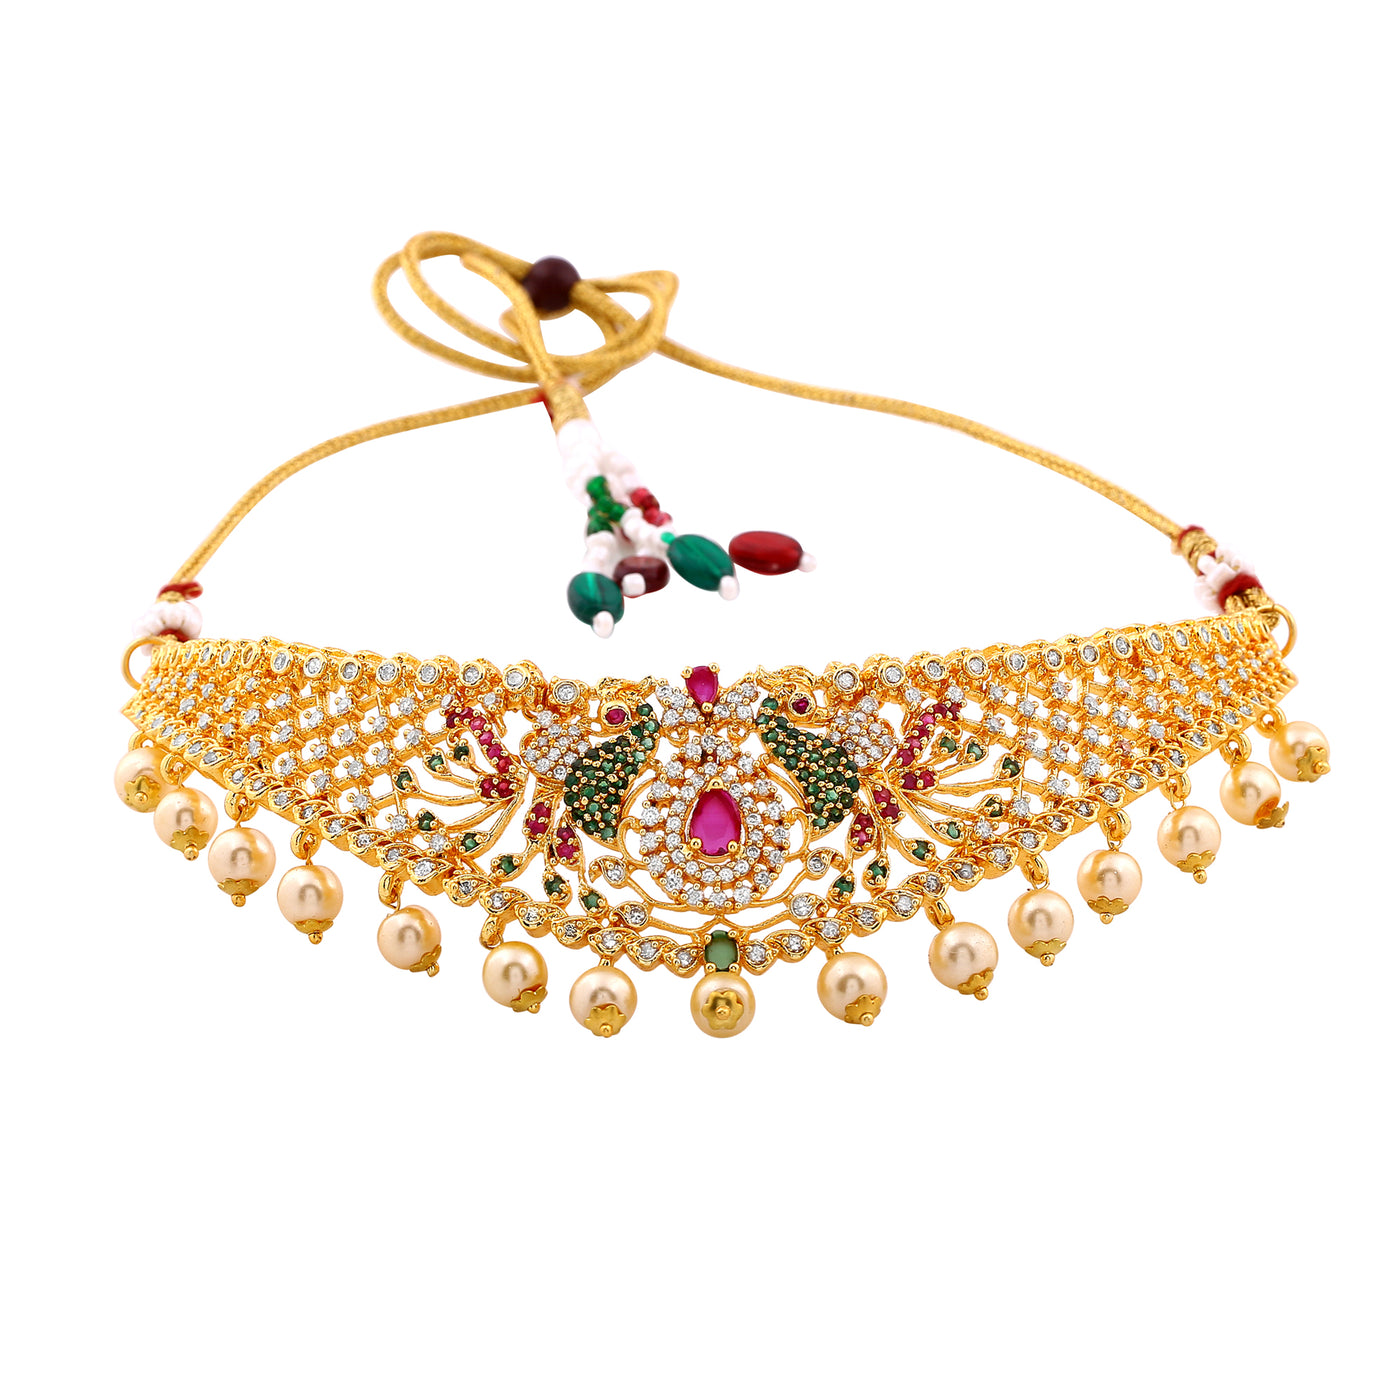 Estele Gold Plated CZ Peacock Designer Bridal Choker Necklace Set with Colored Stones & Pearls